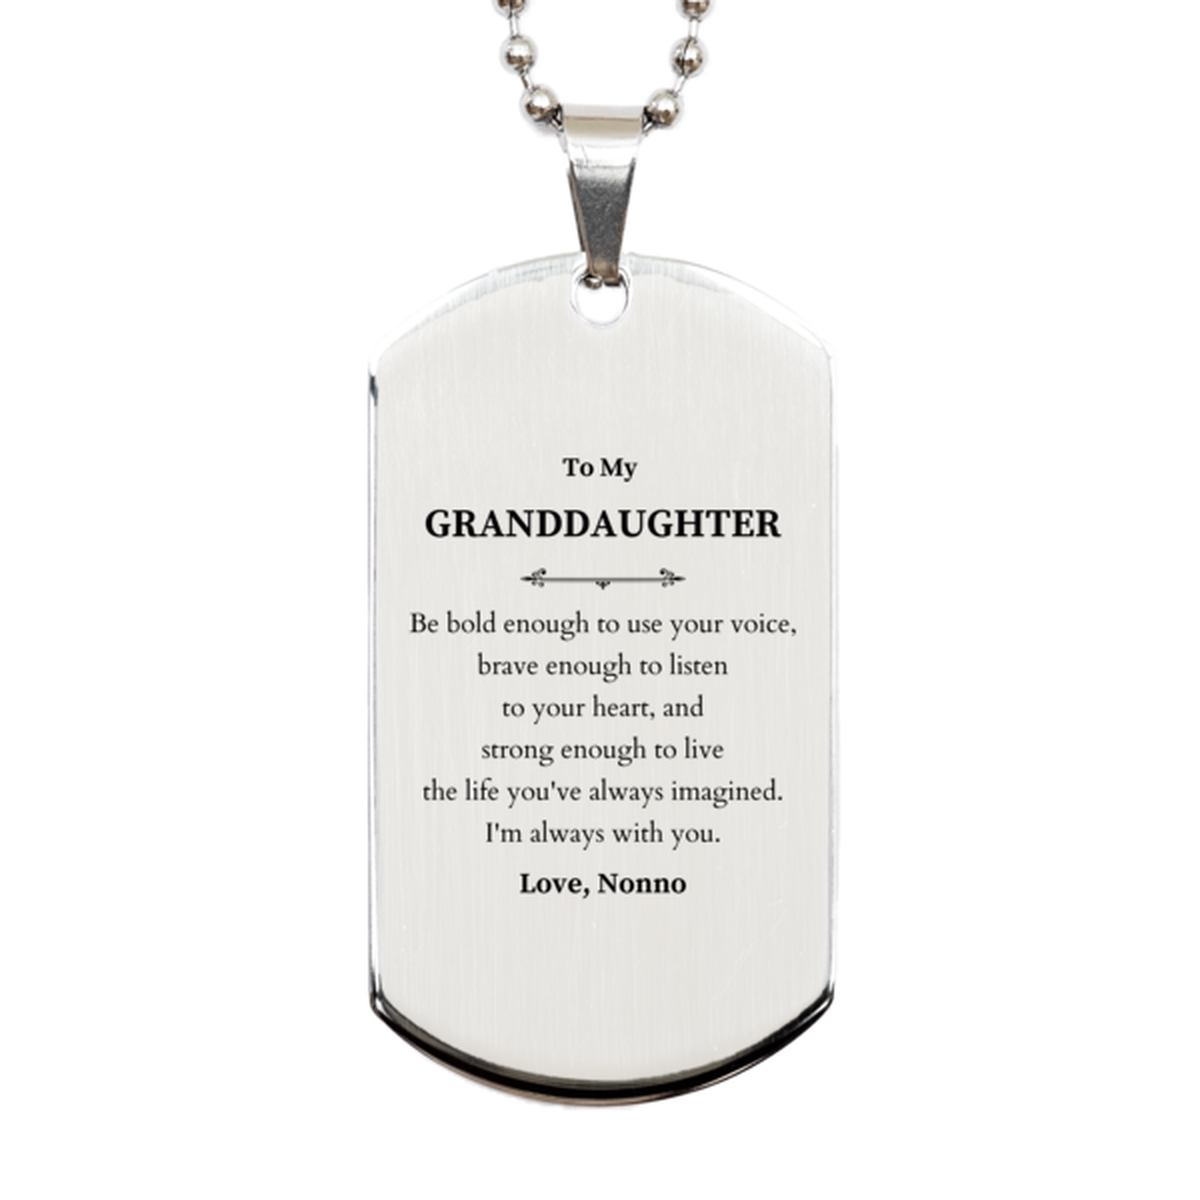 Keepsake Granddaughter Silver Dog Tag Gift Idea Graduation Christmas Birthday Granddaughter from Nonno, Granddaughter Be bold enough to use your voice, brave enough to listen to your heart. Love, Nonno